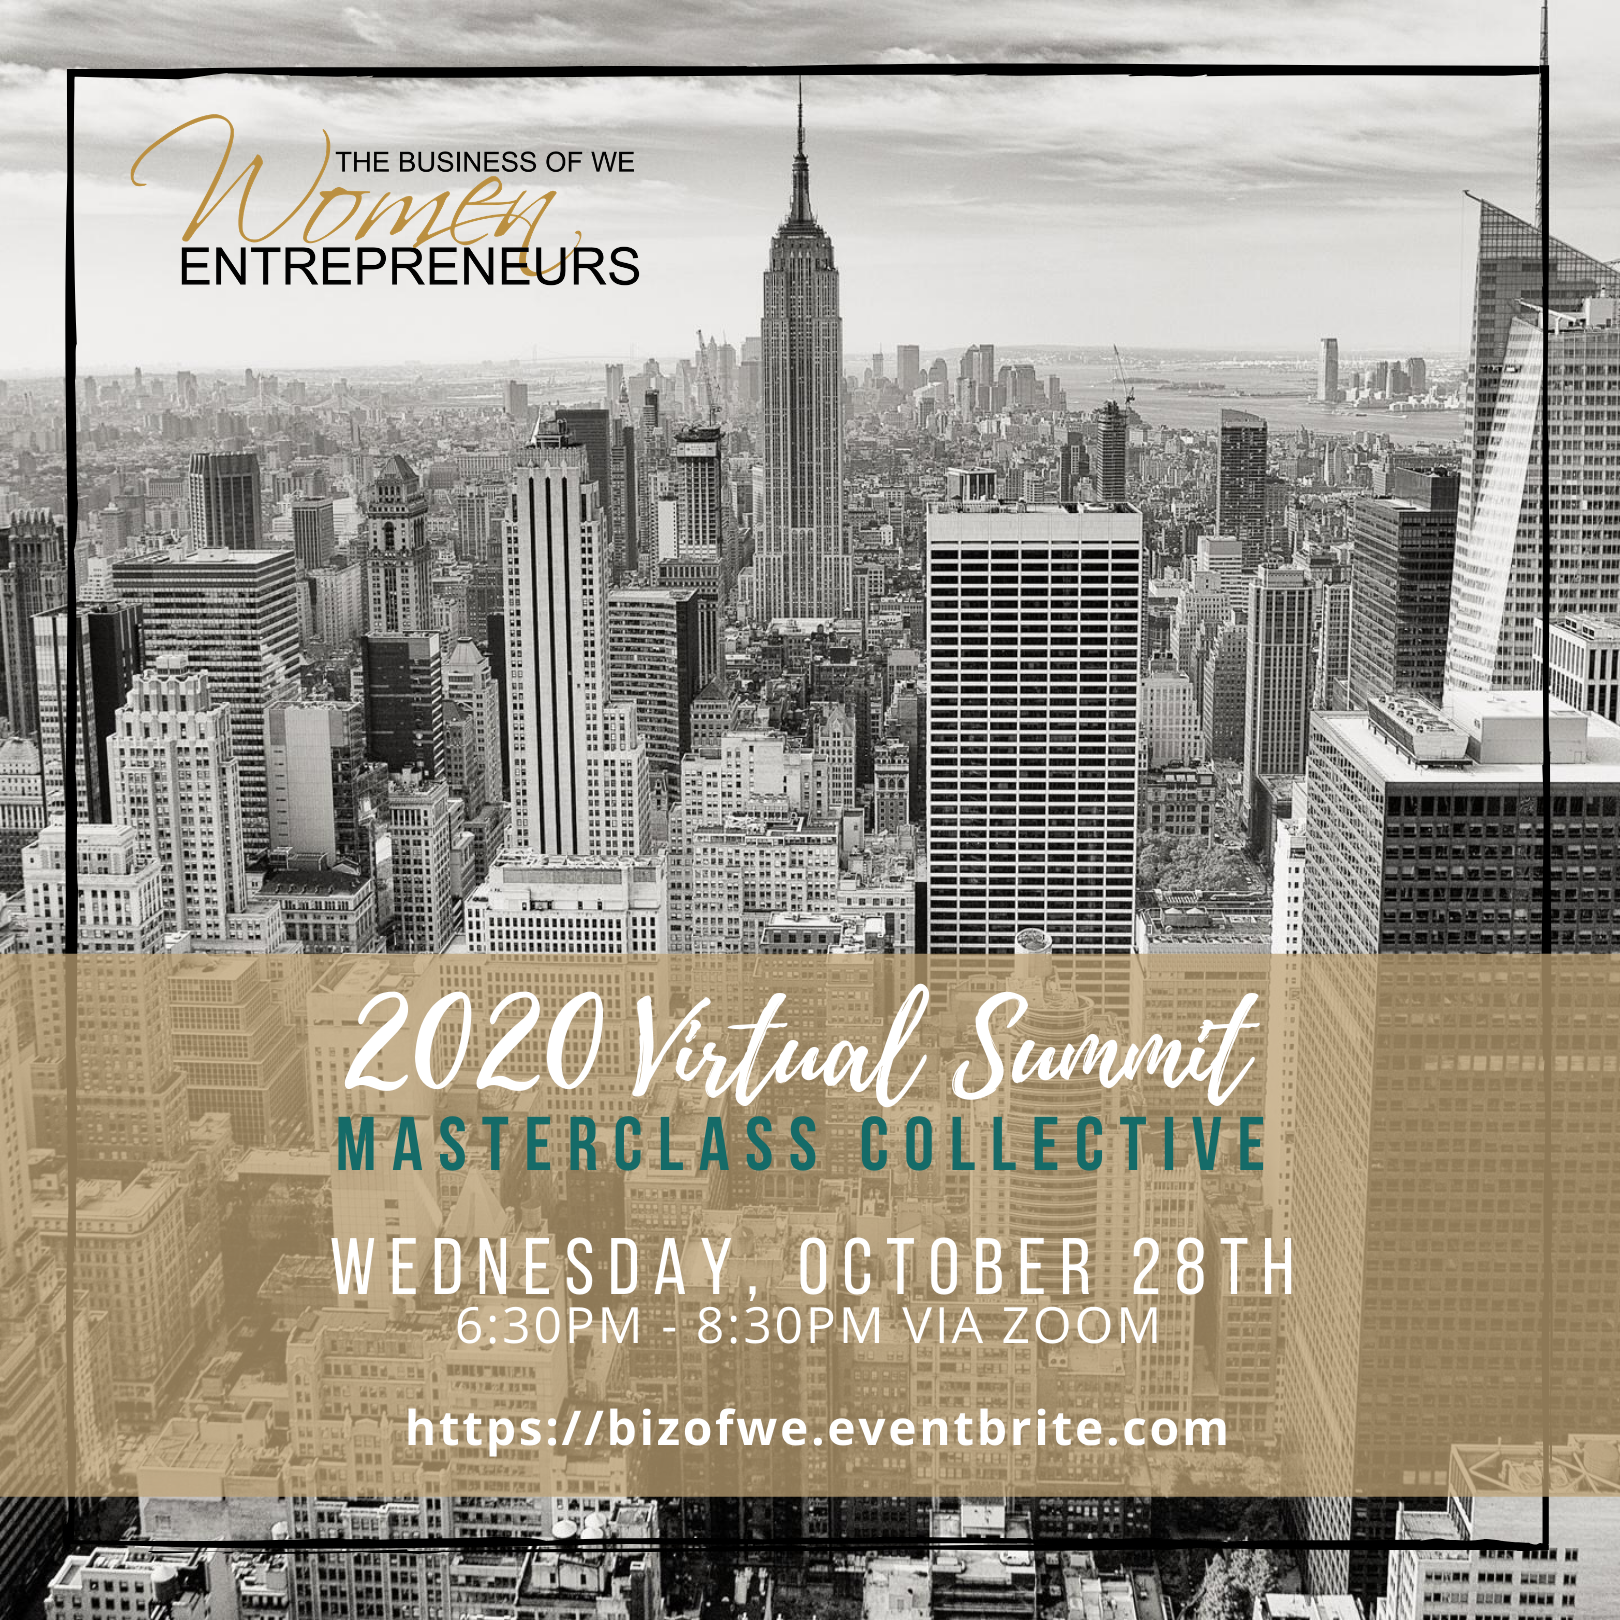 The Business of WE 2020 Virtual Summit